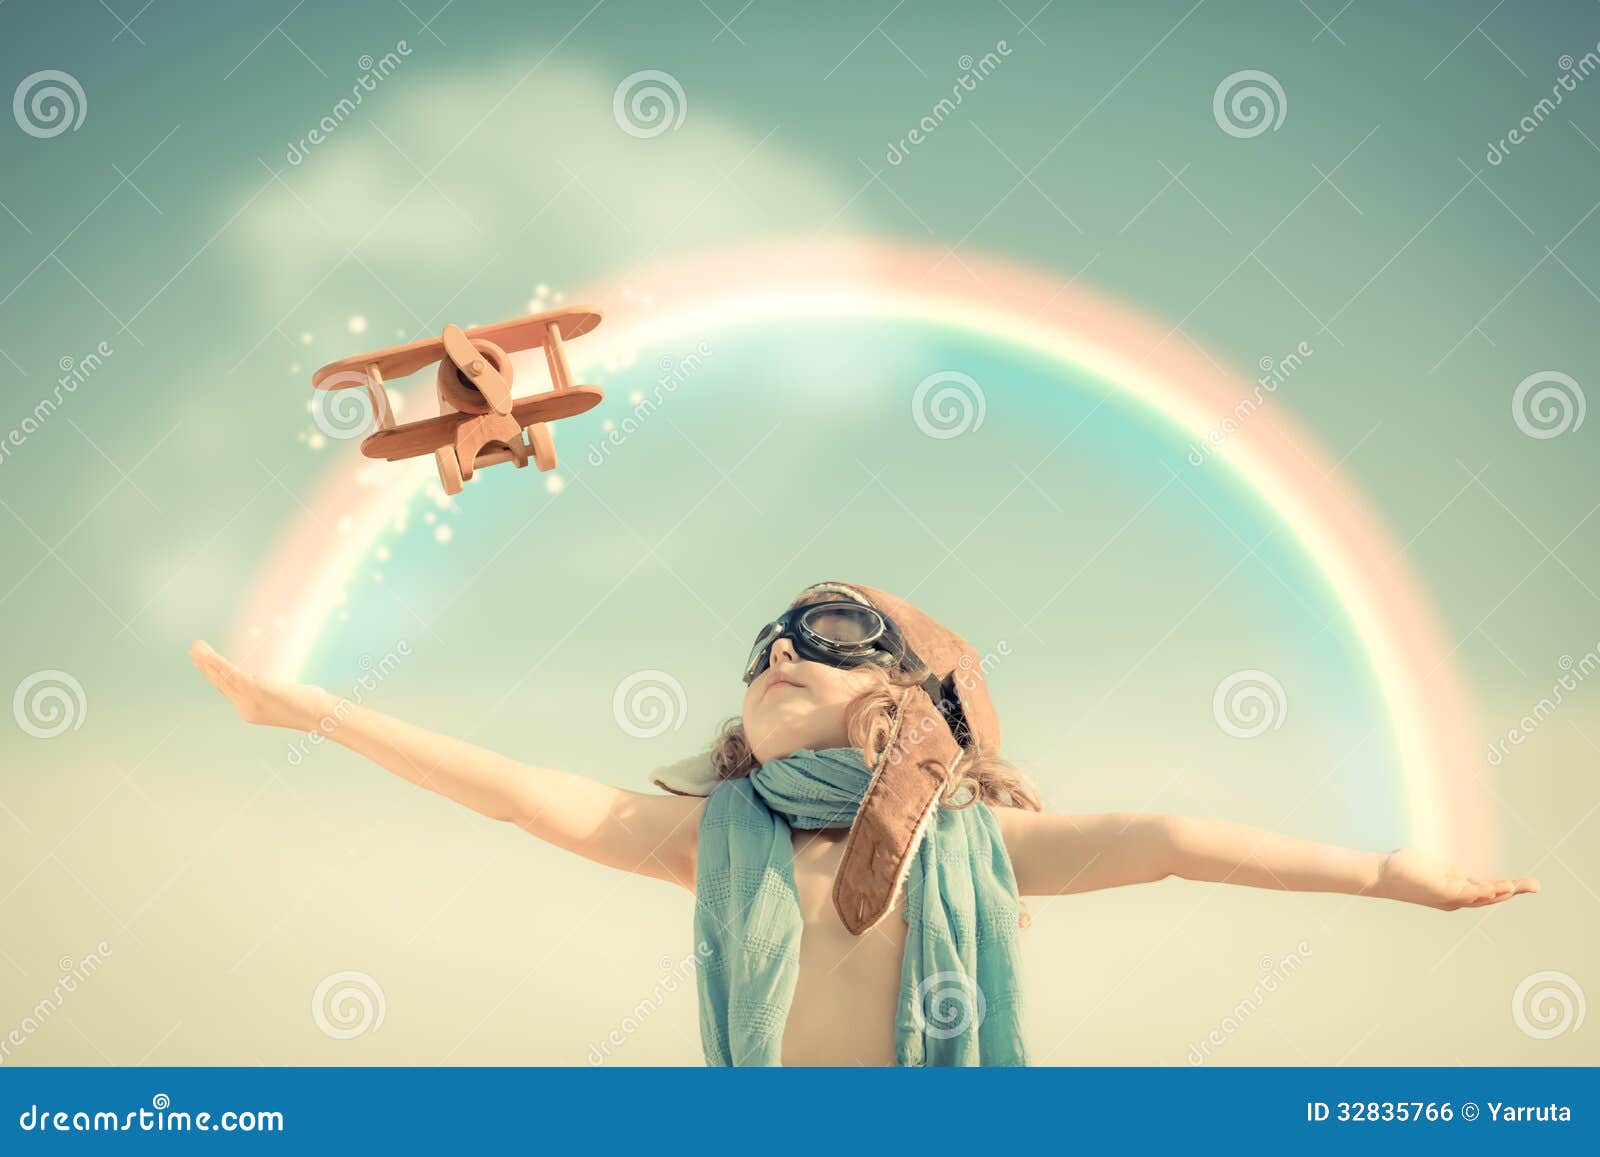 happy kid playing with toy airplane